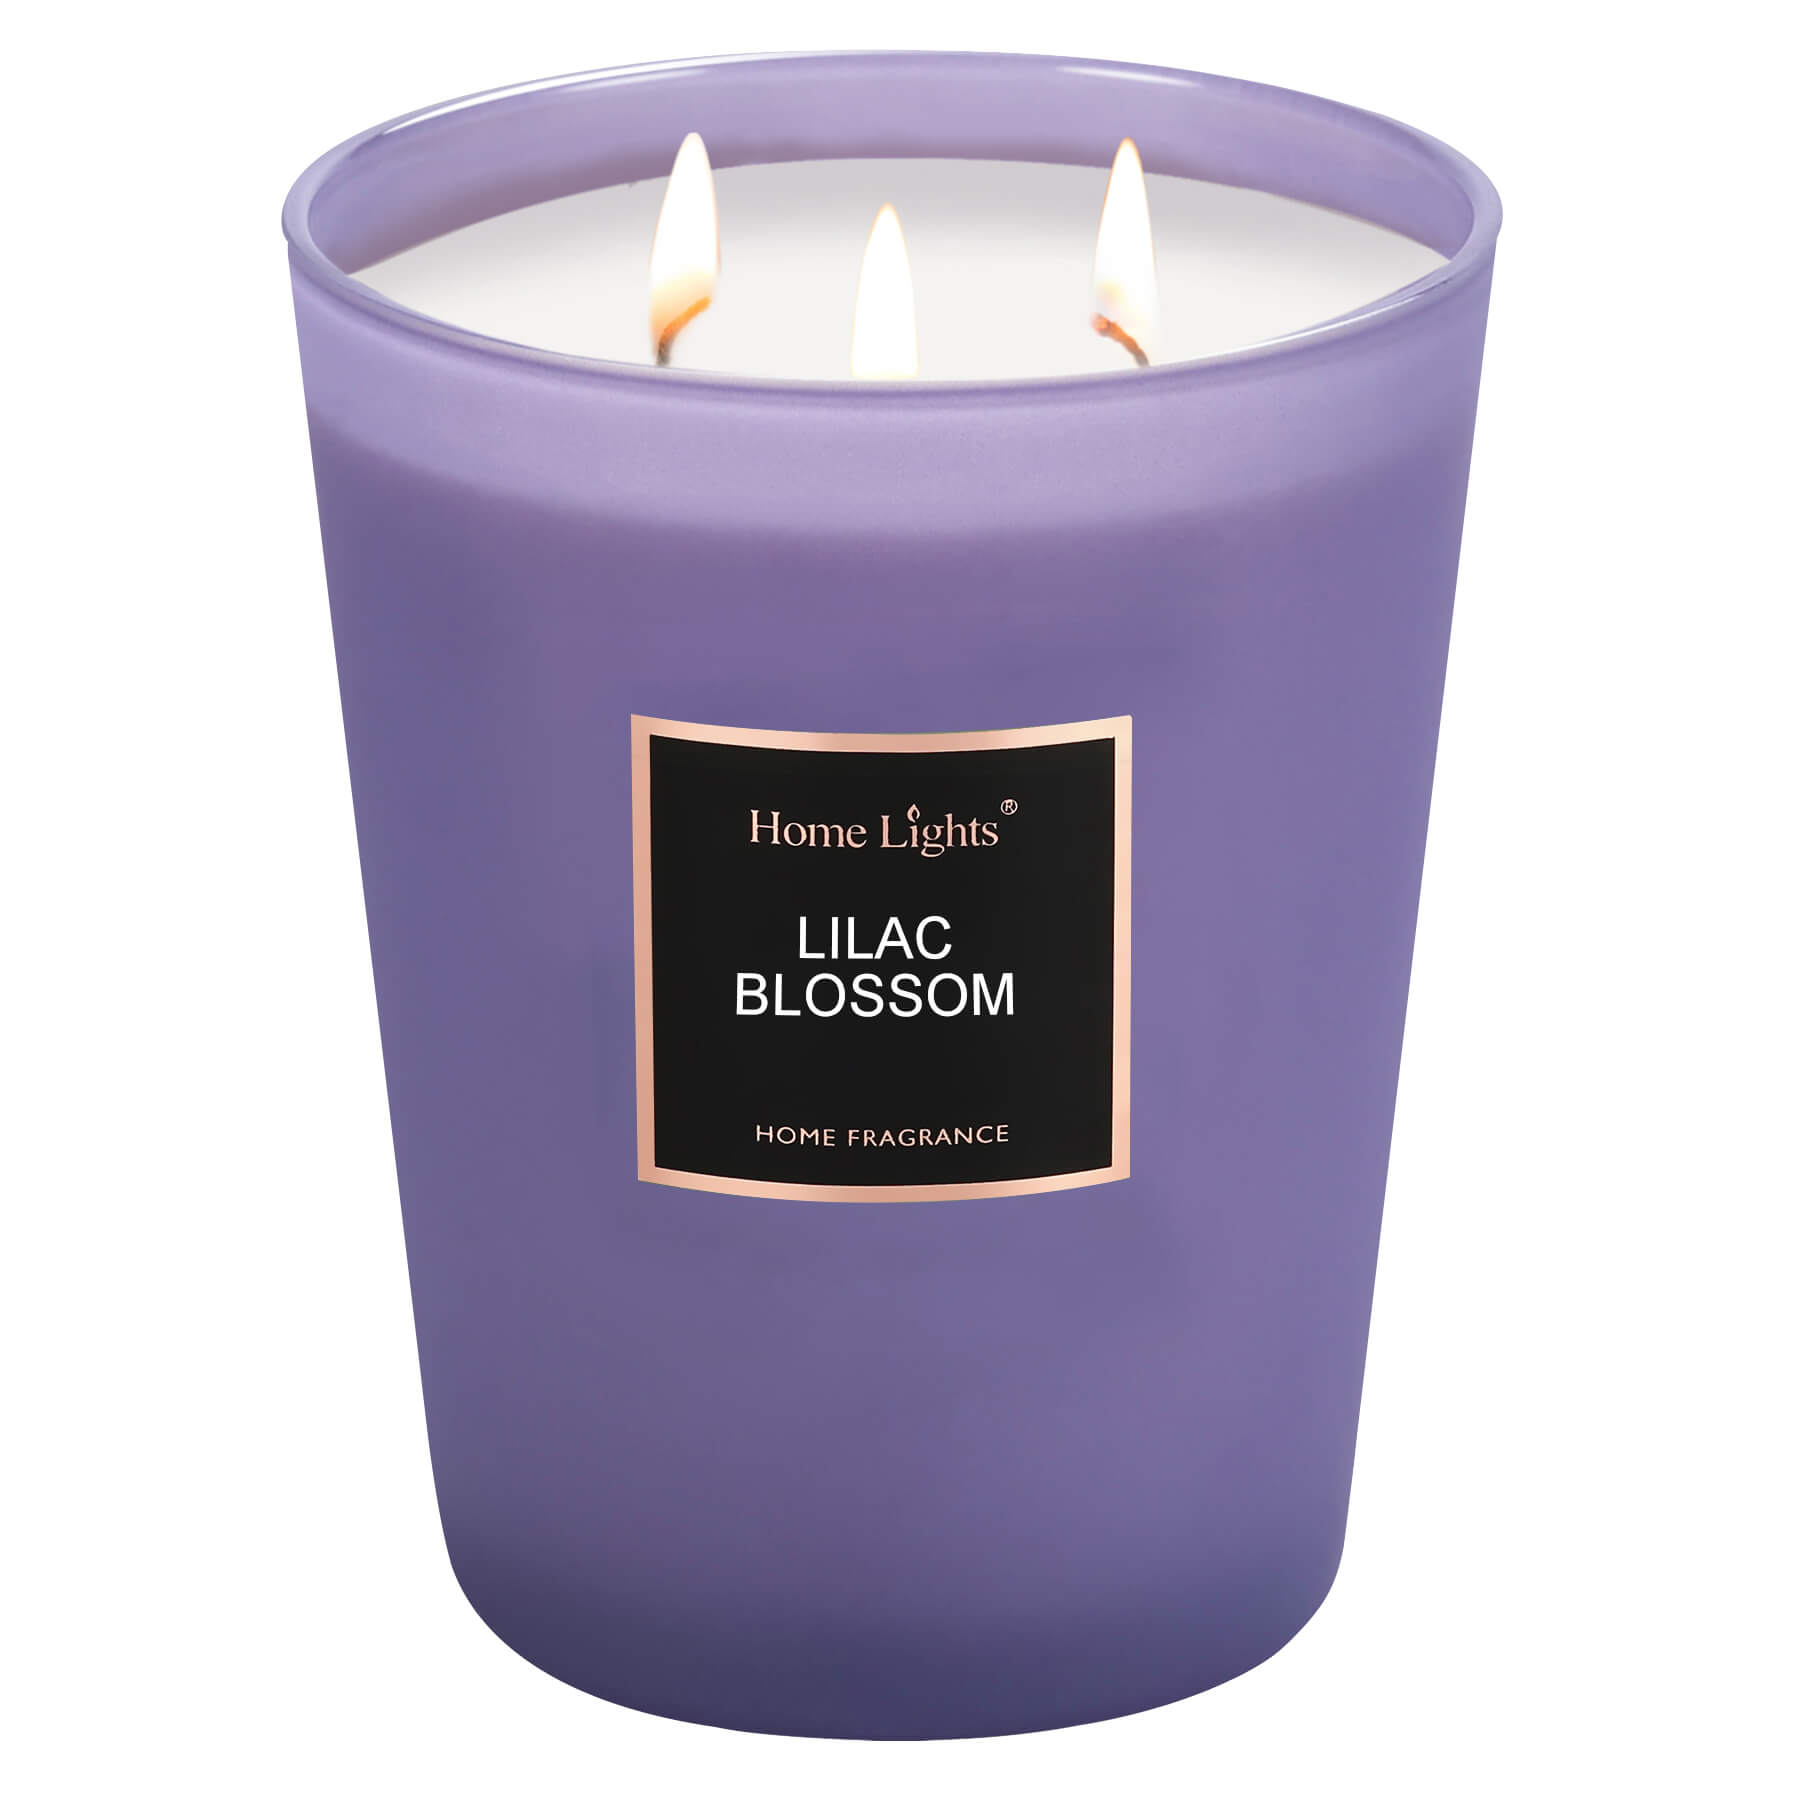 Yankee Candle Lilac Blossoms Large Jar Candle